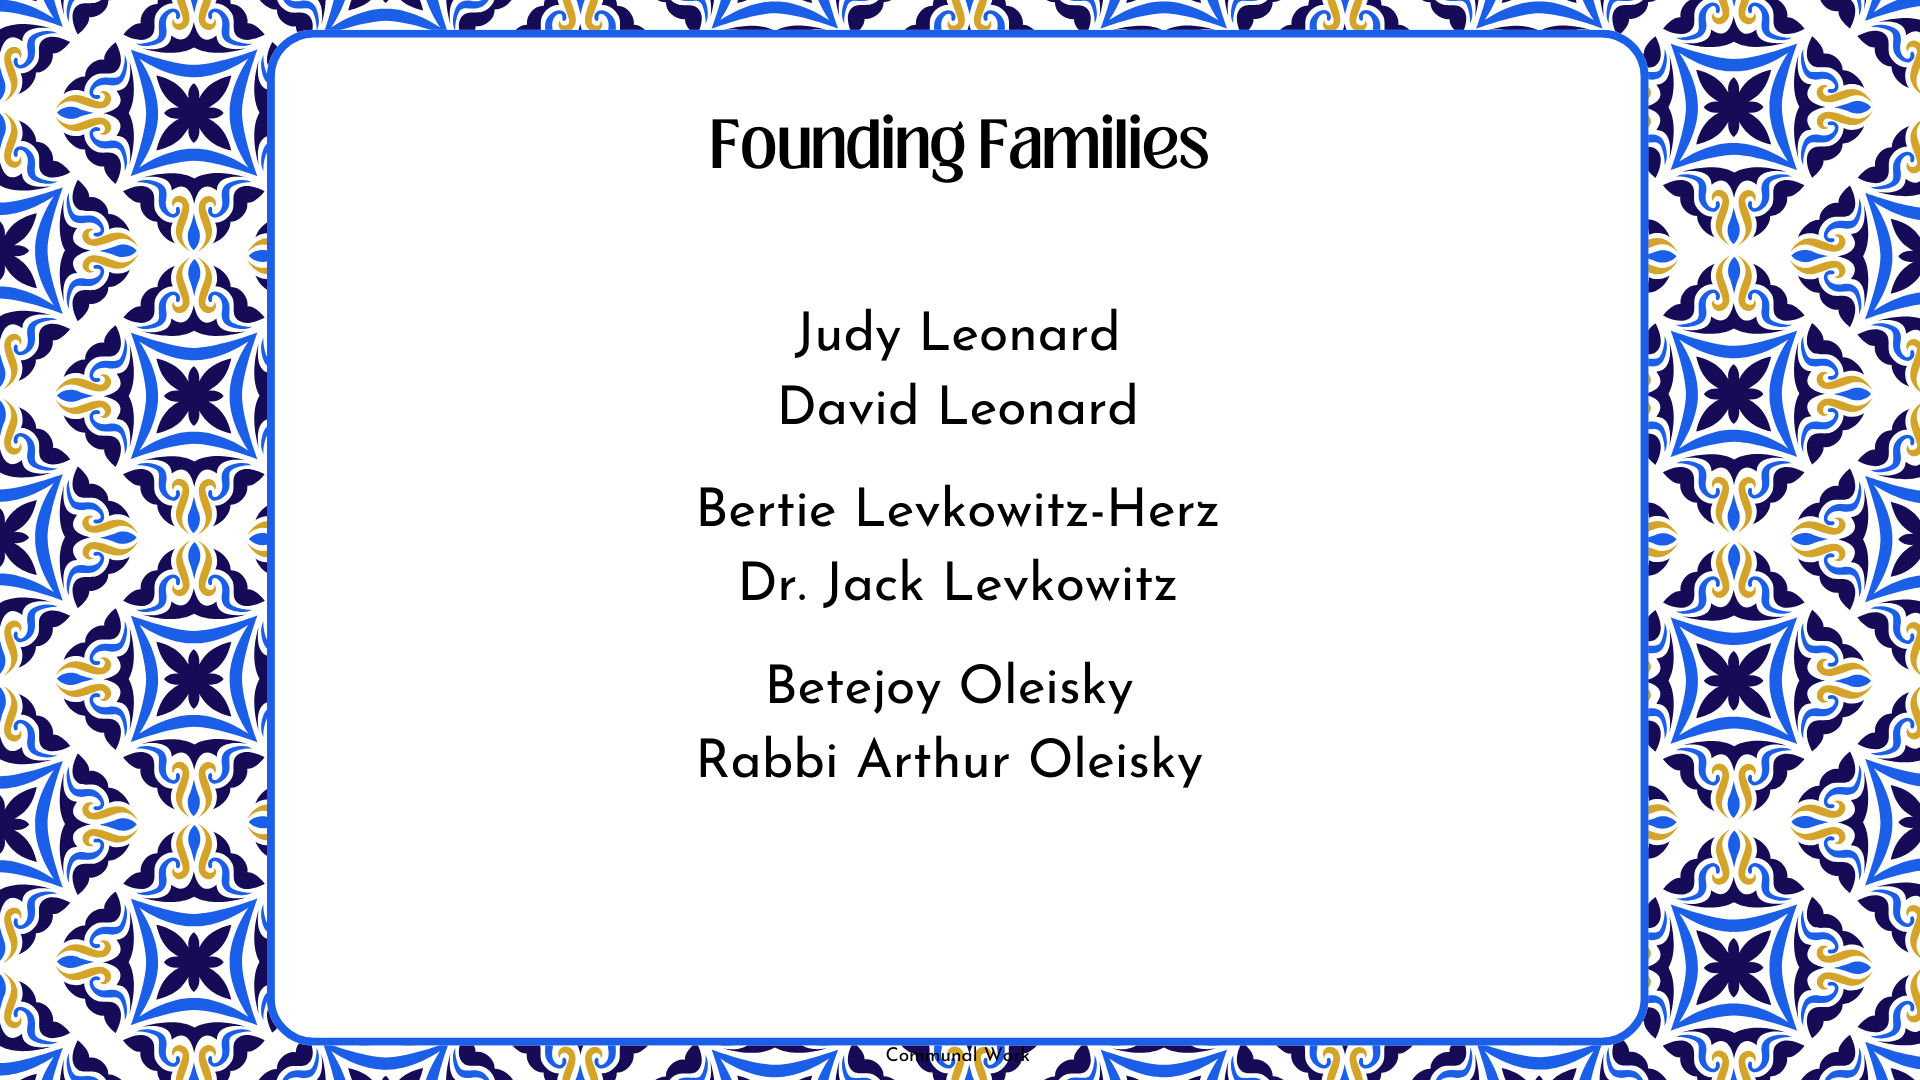 Founding Families Deck.png